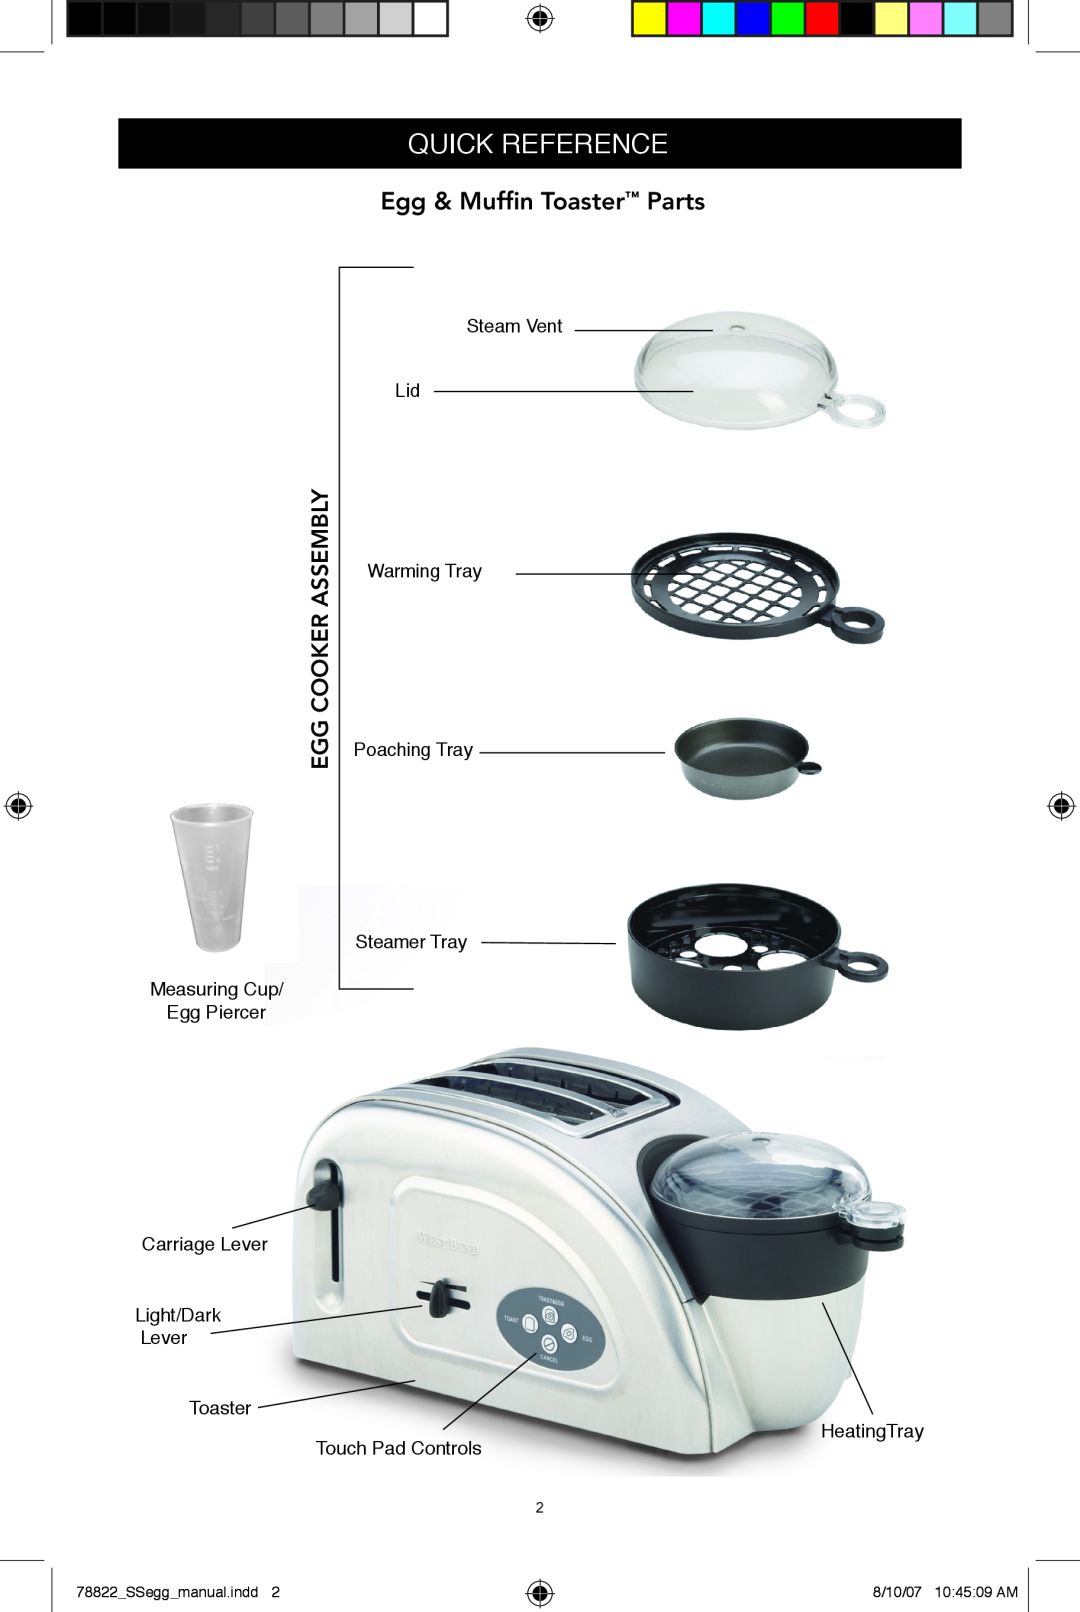 West Bend Egg and Muffin Toaster Quick Reference, Egg & Muffin Toaster Parts, Cooker Assembly, Steam Vent Lid, HeatingTray 